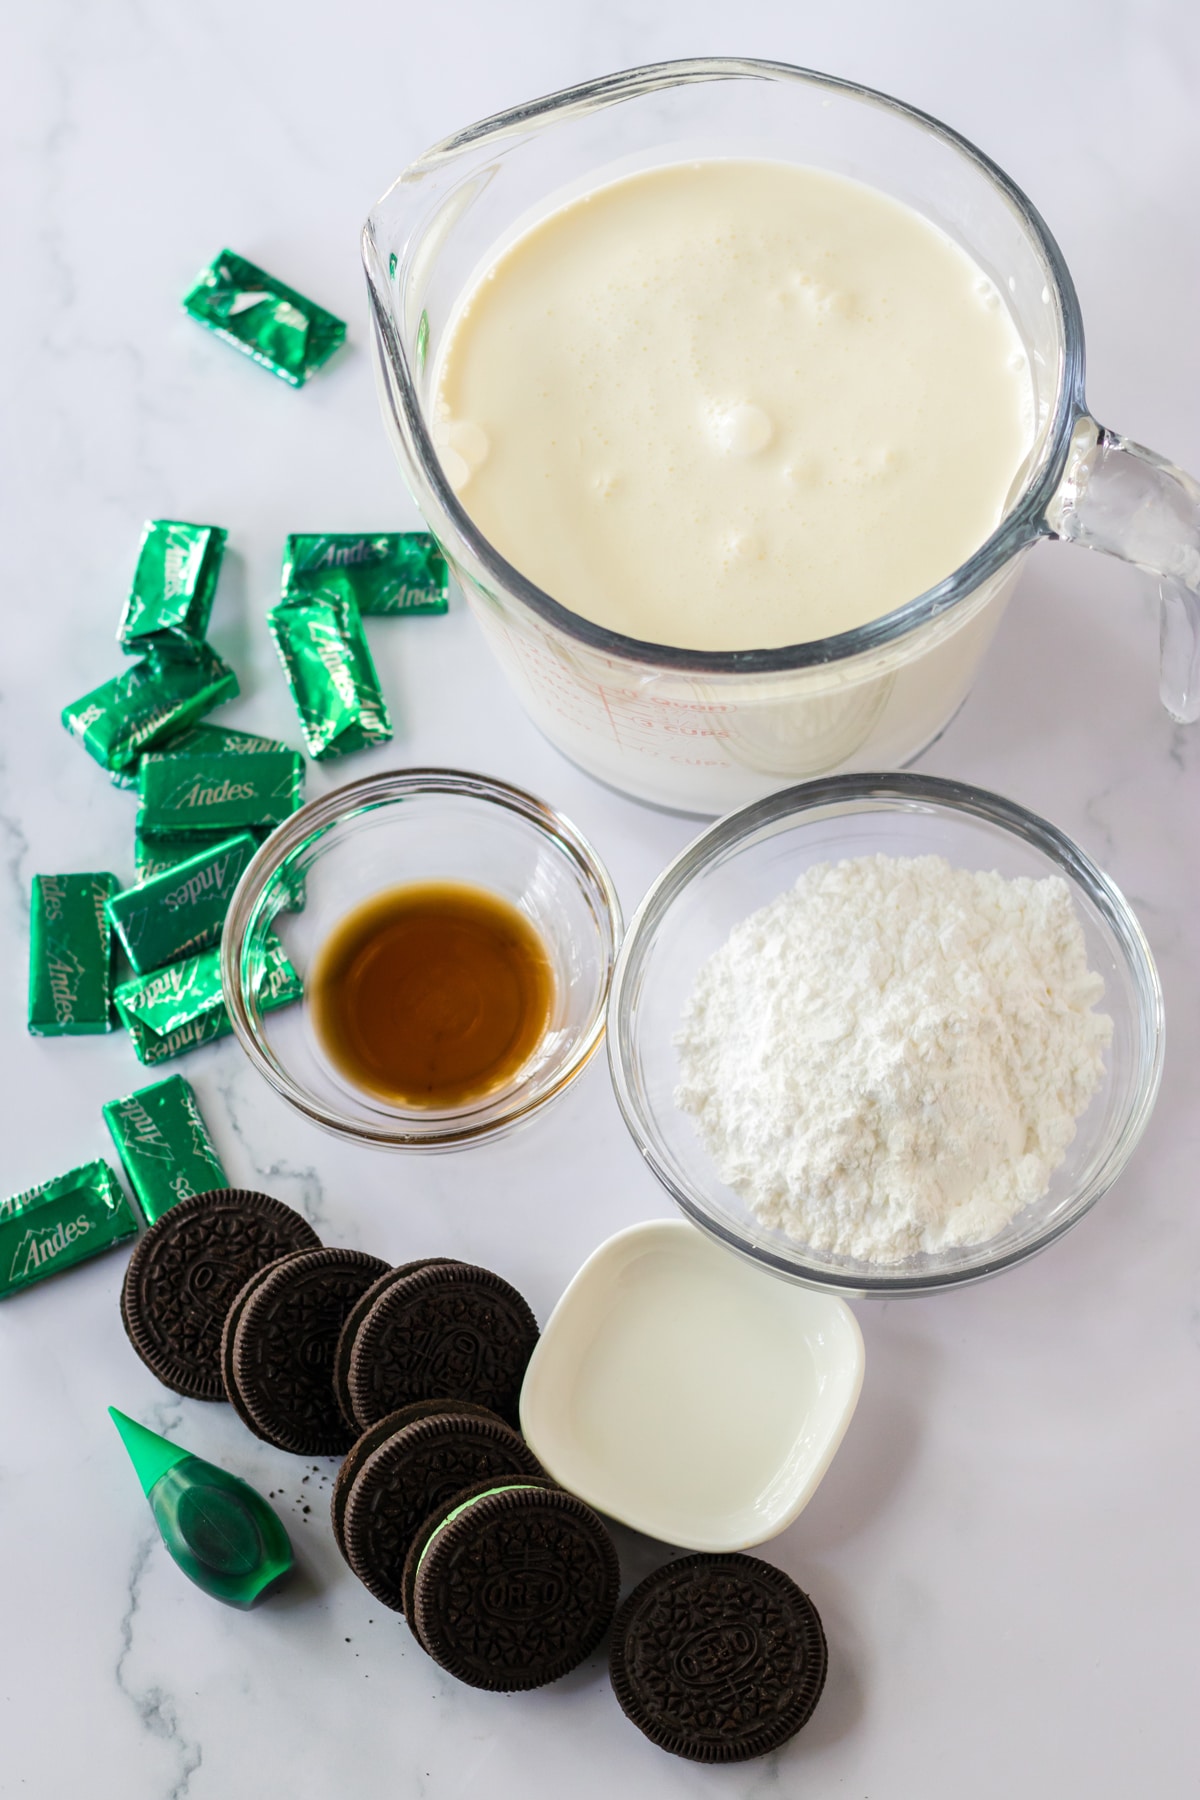 Ingredients for Mint Chocolate Icebox Cake include Mint Oreo cookies, heavy whipping cream, powdered sugar, pure vanilla extract, mint extract, green food coloring, and Andes mints for toppings.